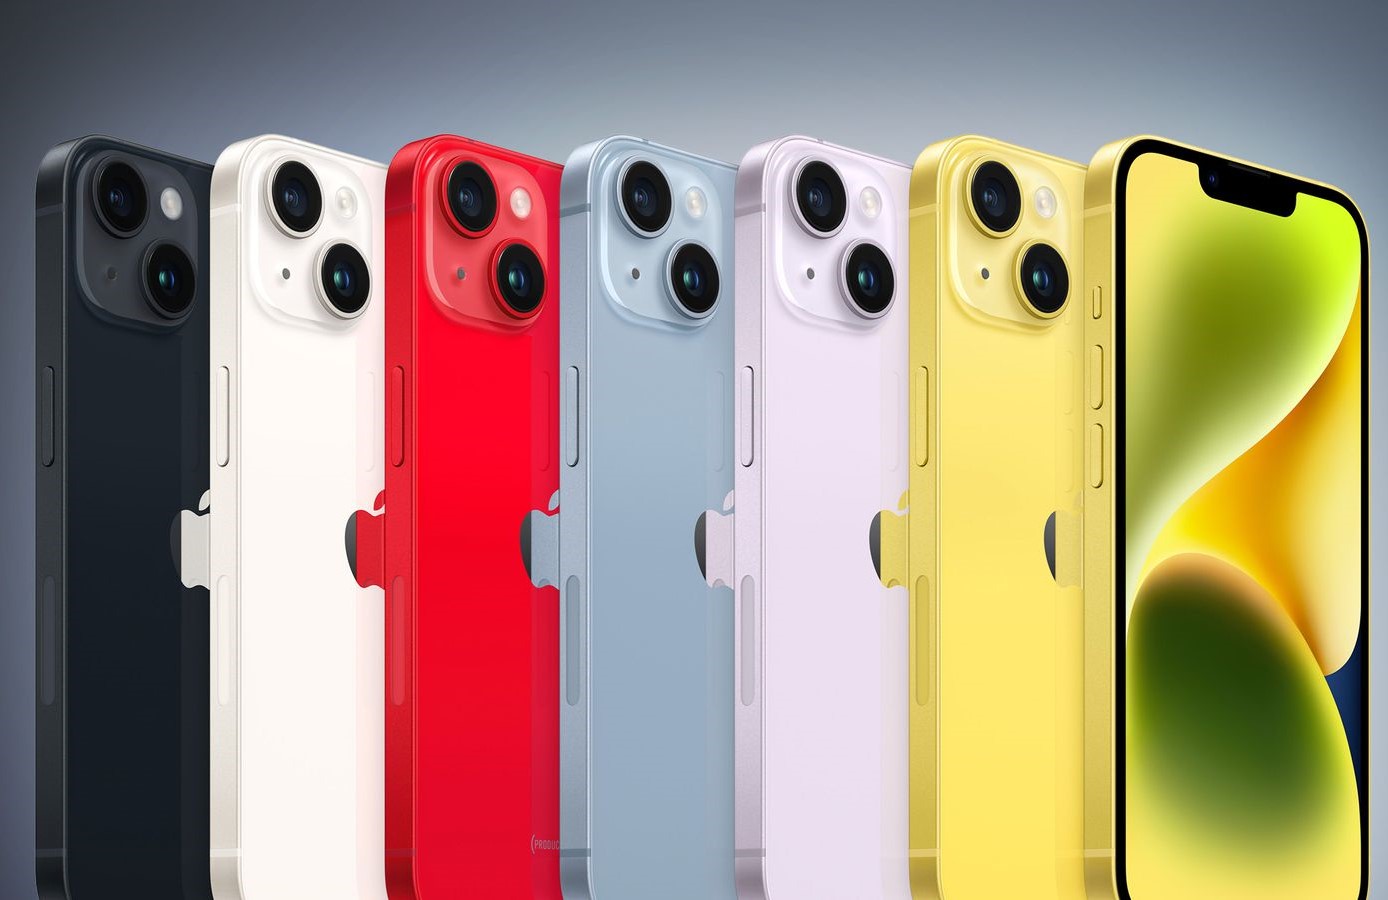 Anticipated IPhone 14 Colors: Speculating On The Colors Of IPhone 14